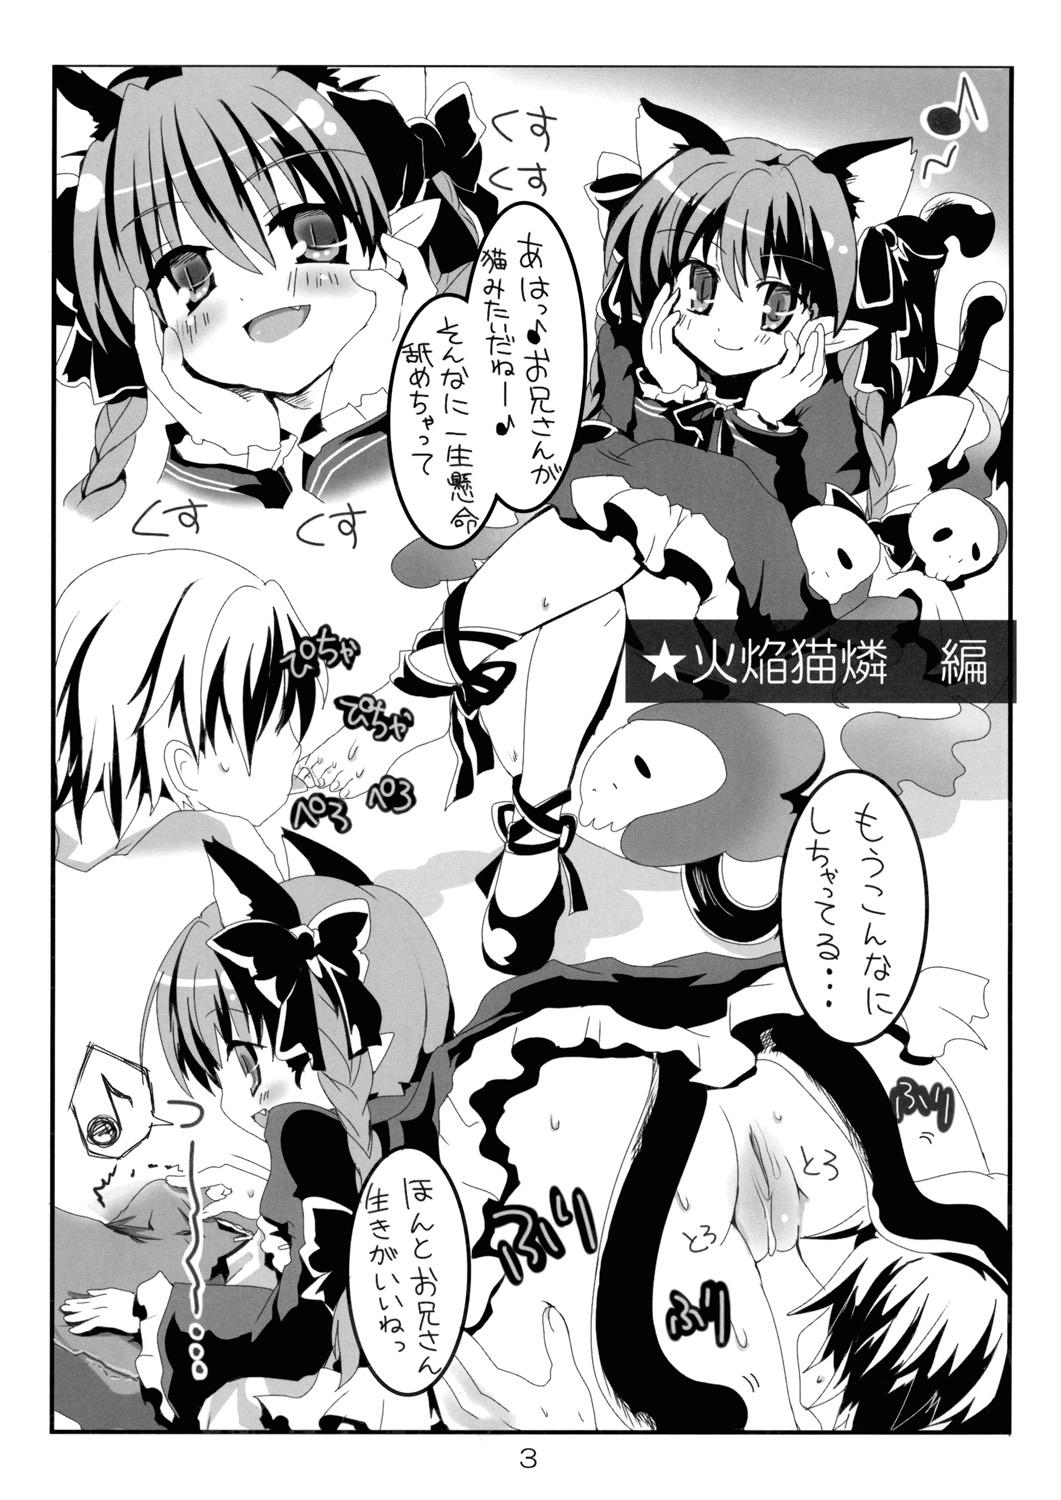 Gostosas Domination Magic - Touhou project Blowjob - Page 4